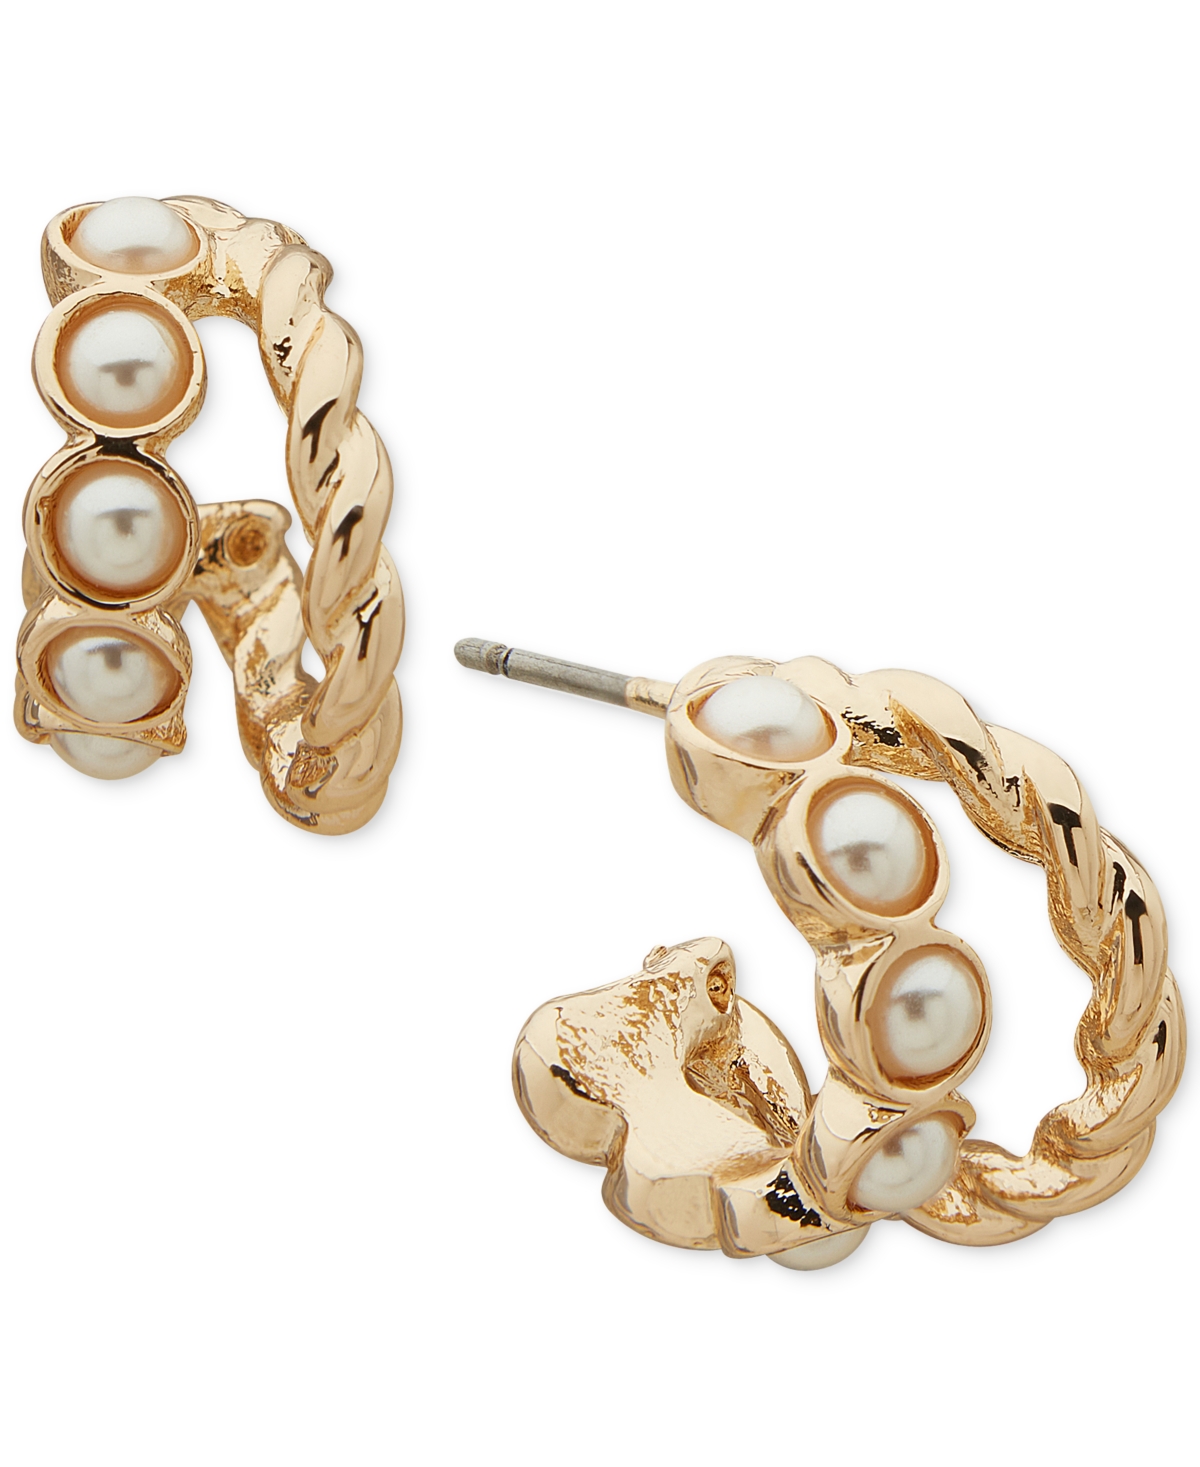 Shop Anne Klein Gold-tone Small Imitation Pearl Double-row C-hoop Earrings, 0.56"